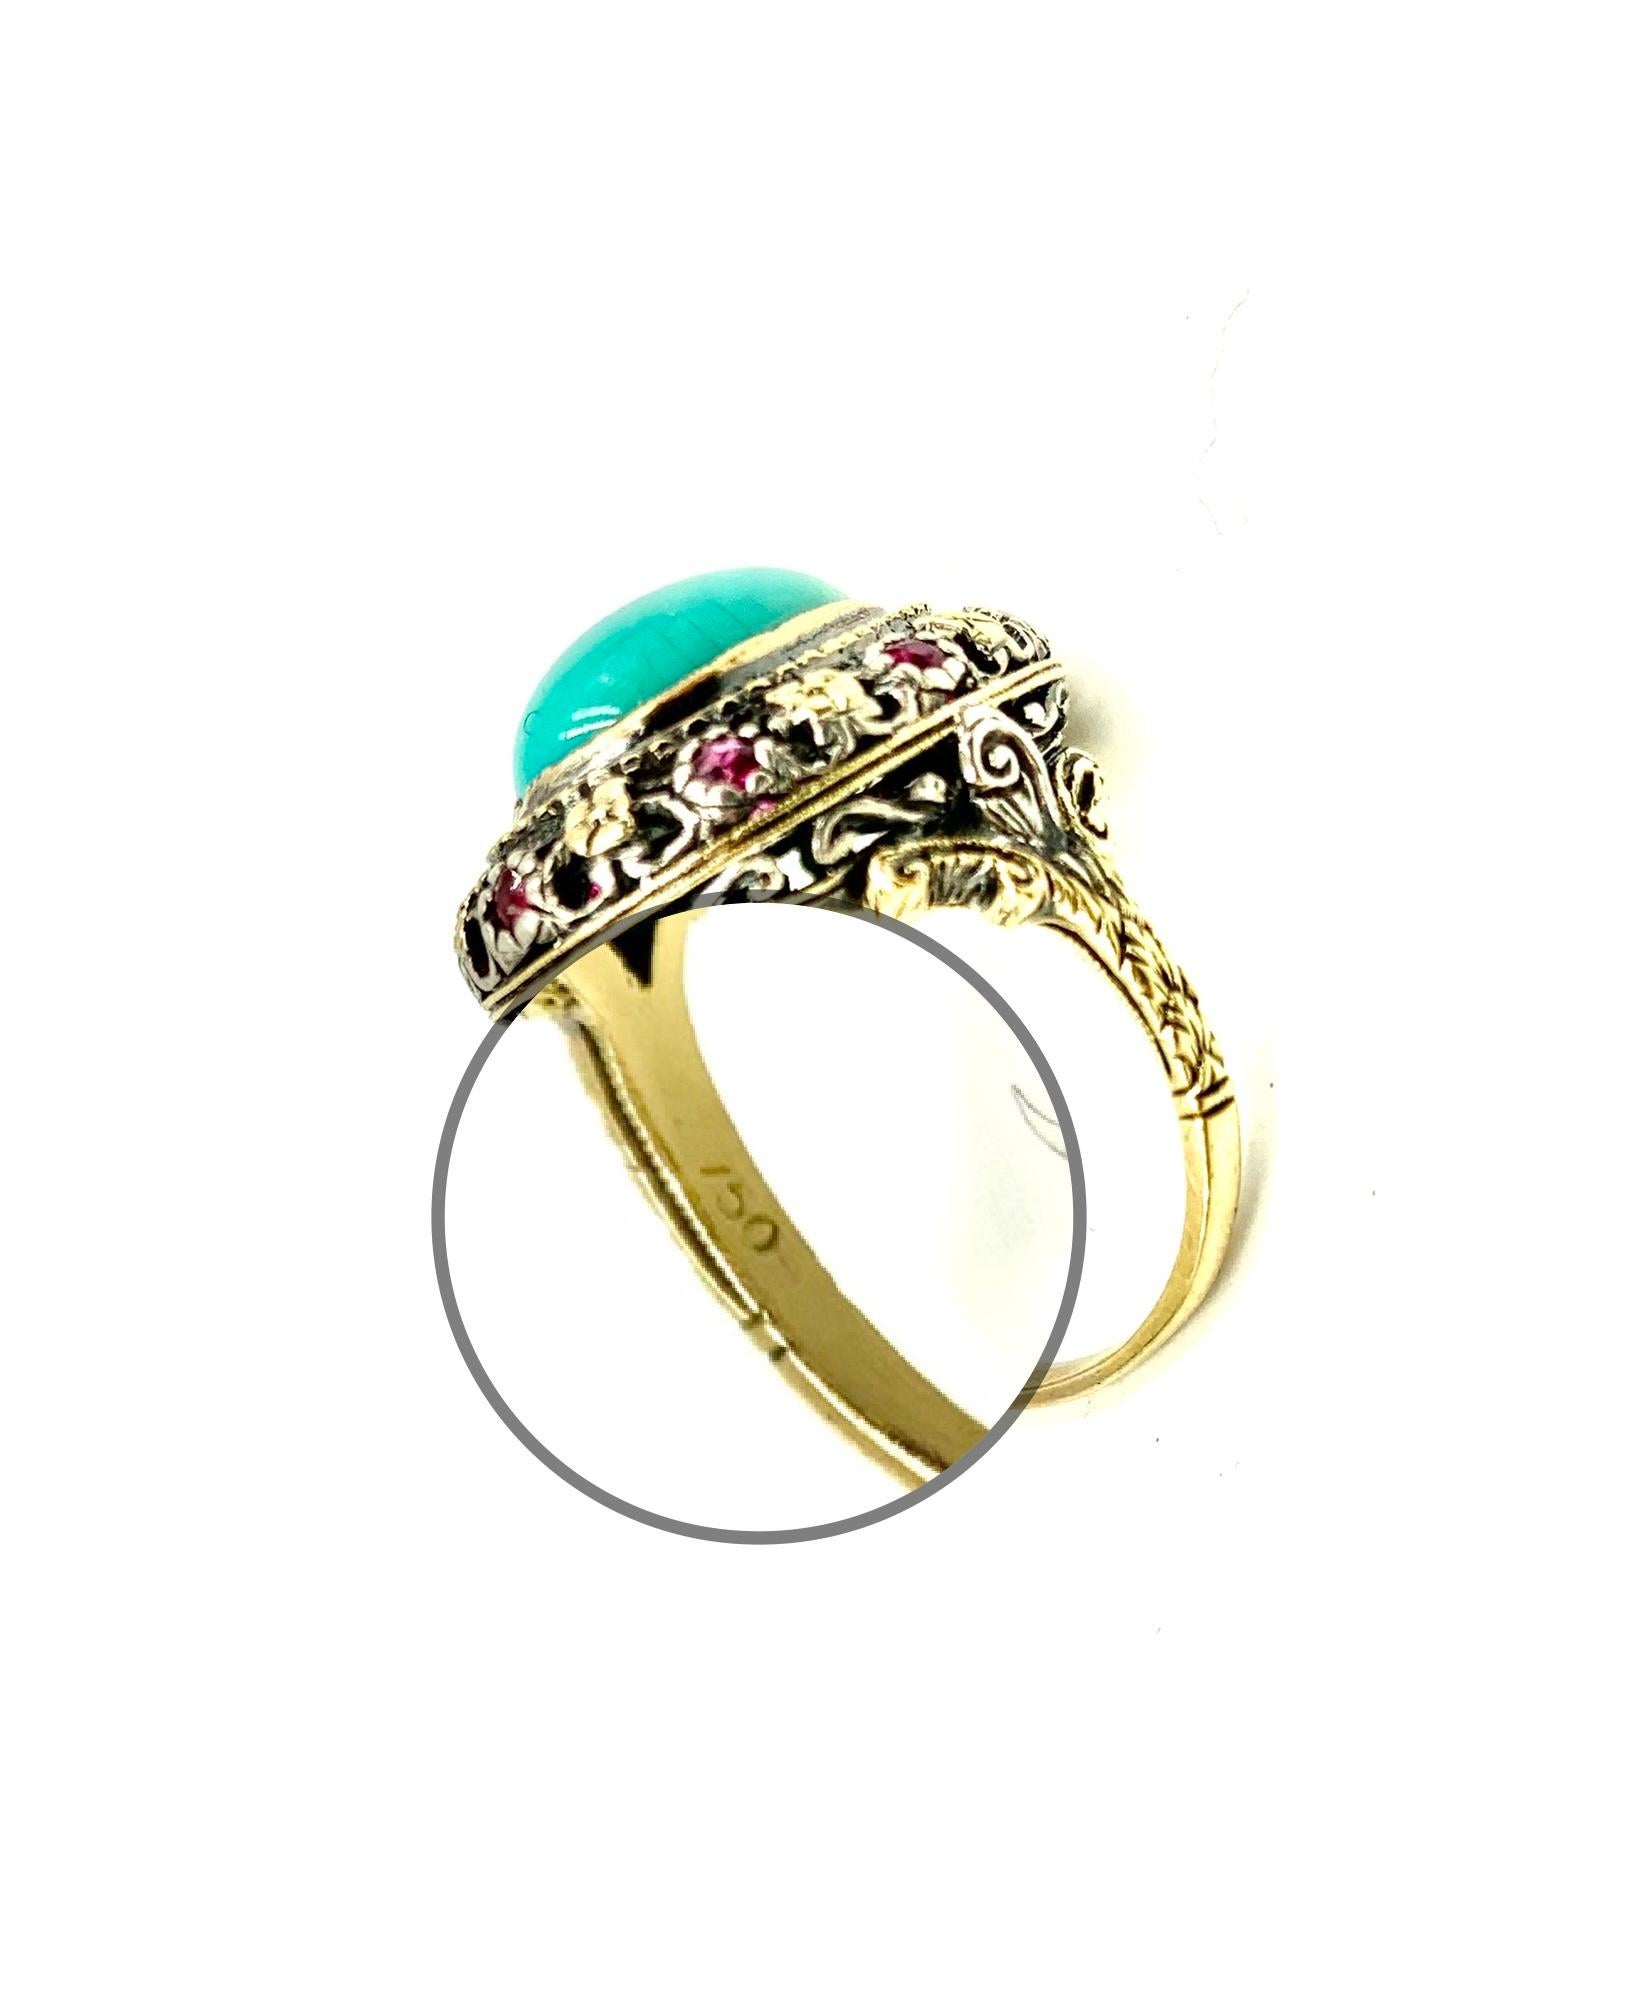 Cabochon Antique Renaissance Style Turquoise, Ruby 18K Filigree Gold Ring, 19th Century For Sale